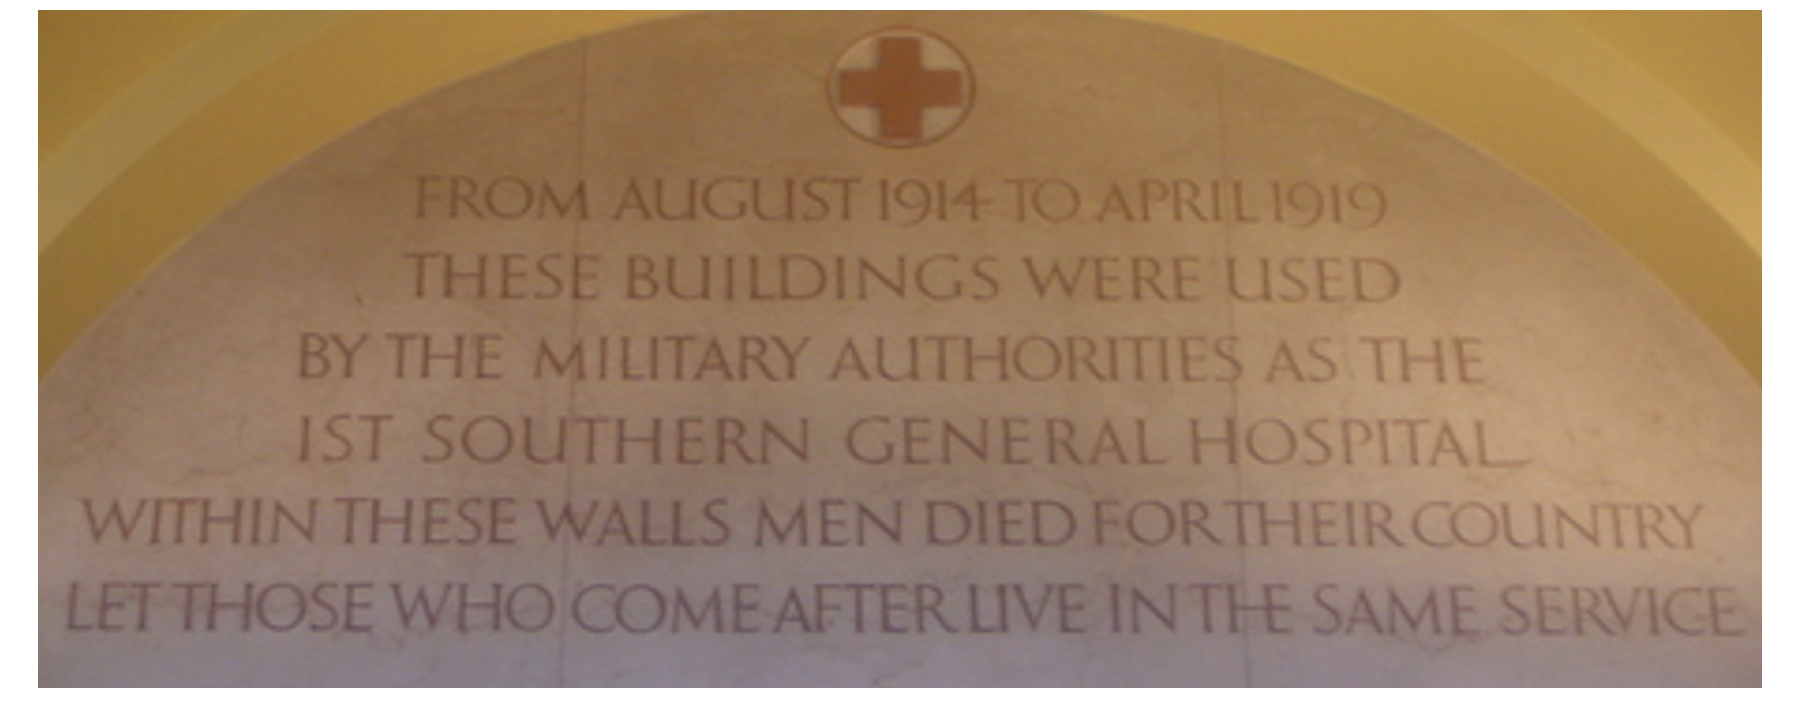 Figure 1 Message in Southern Hospital Great Hall, University of Birmingham 